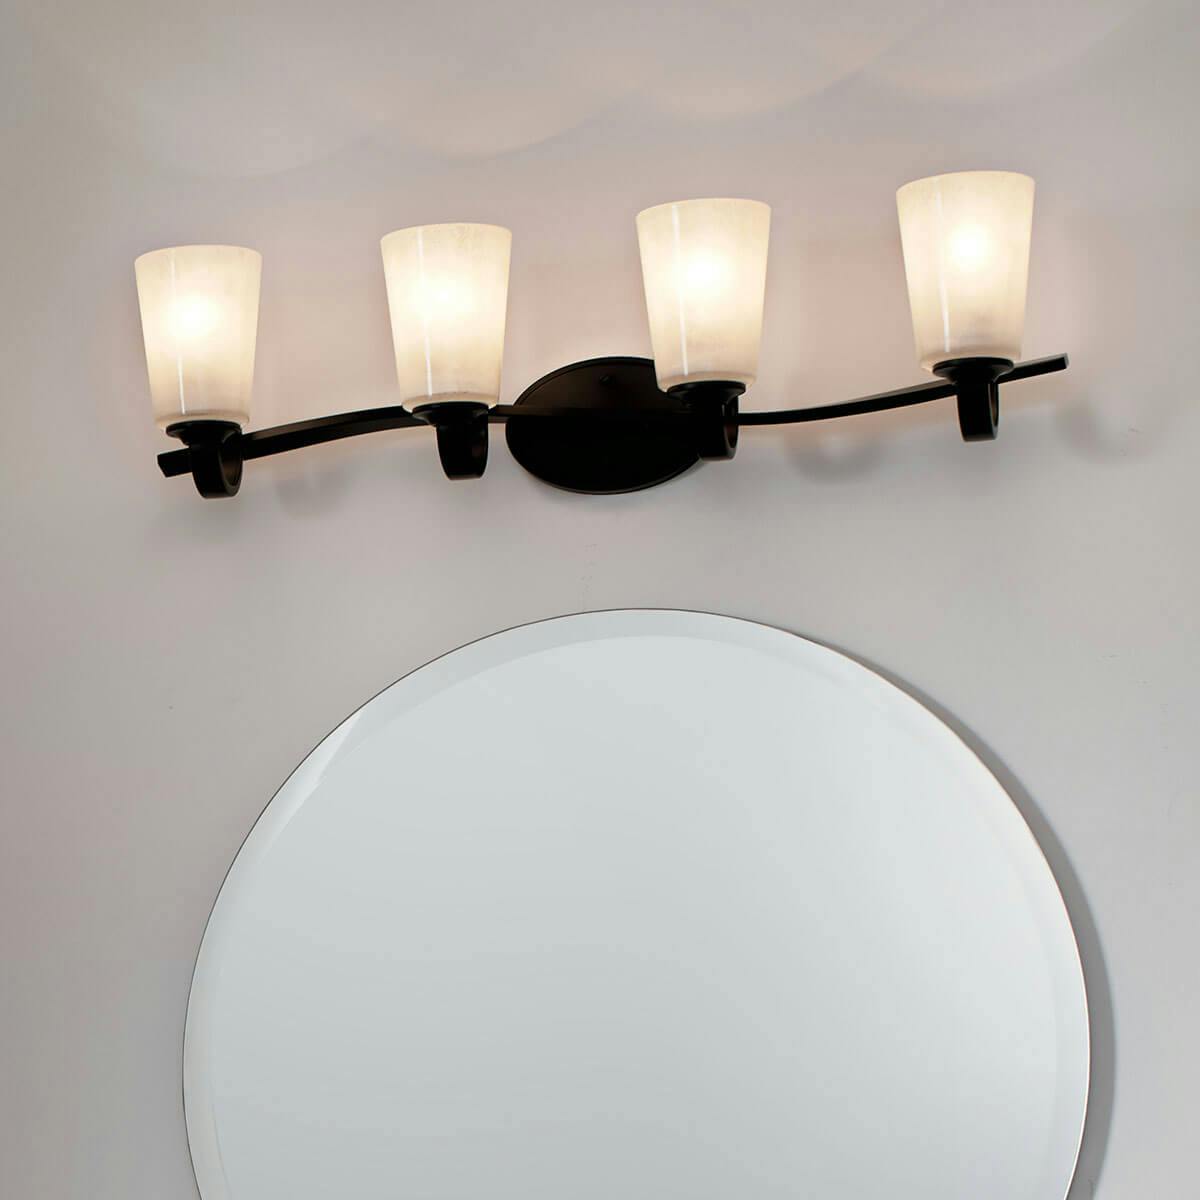 Day time Bathroom featuring Oxby vanity light 37518BK